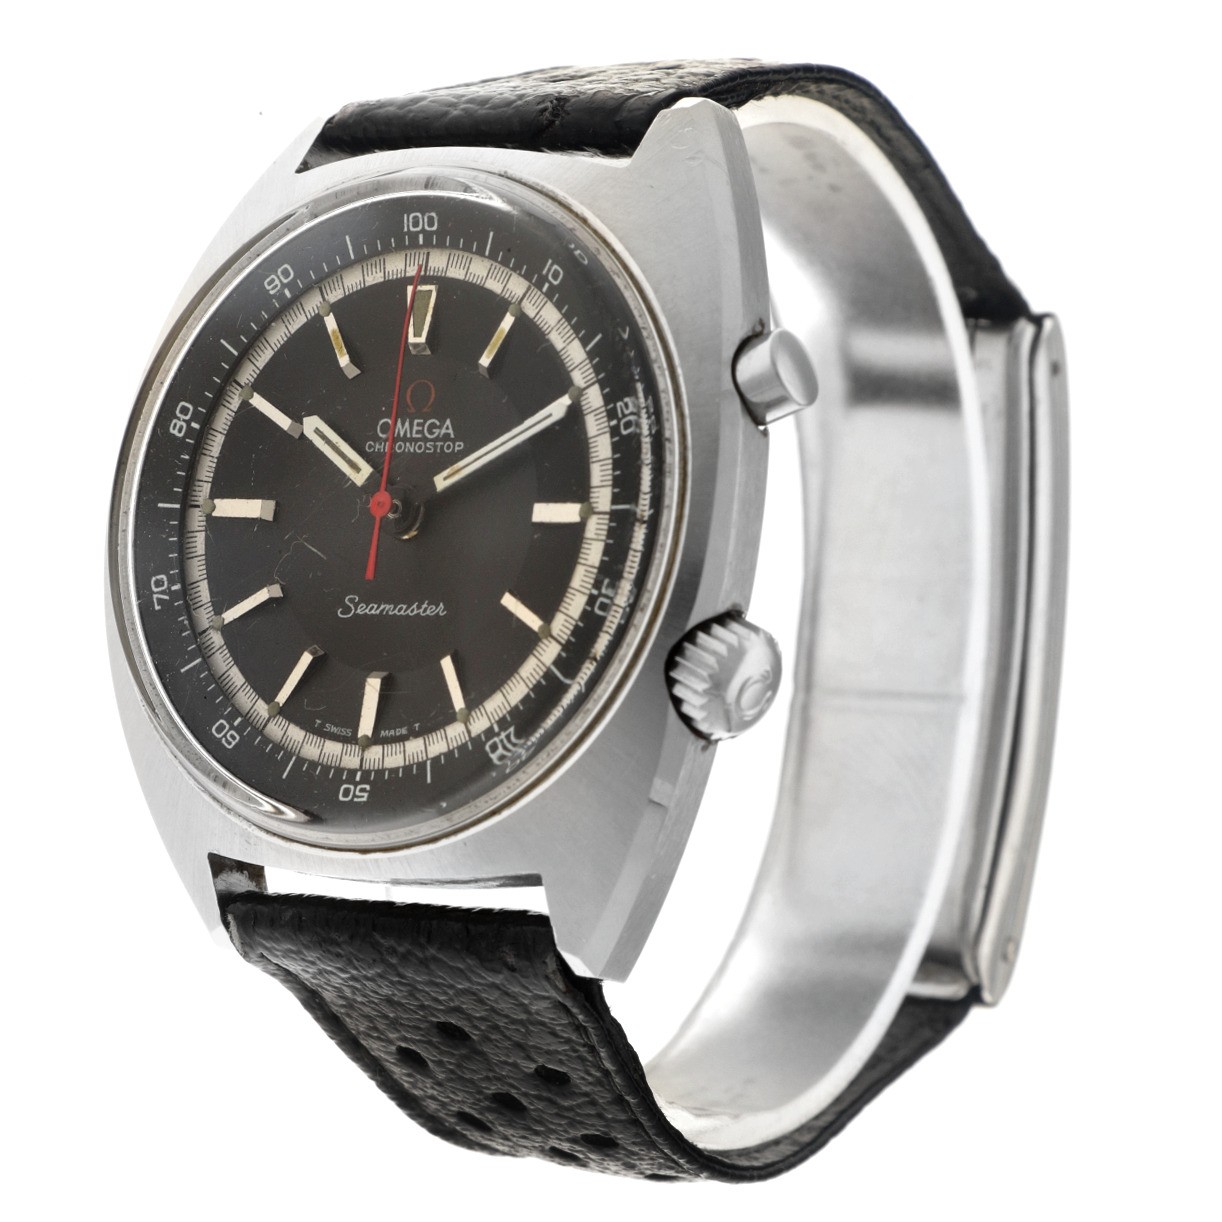 No Reserve - Omega Seamaster Chronostop 145.007 - Men's watch - approx. 1969. - Image 2 of 6